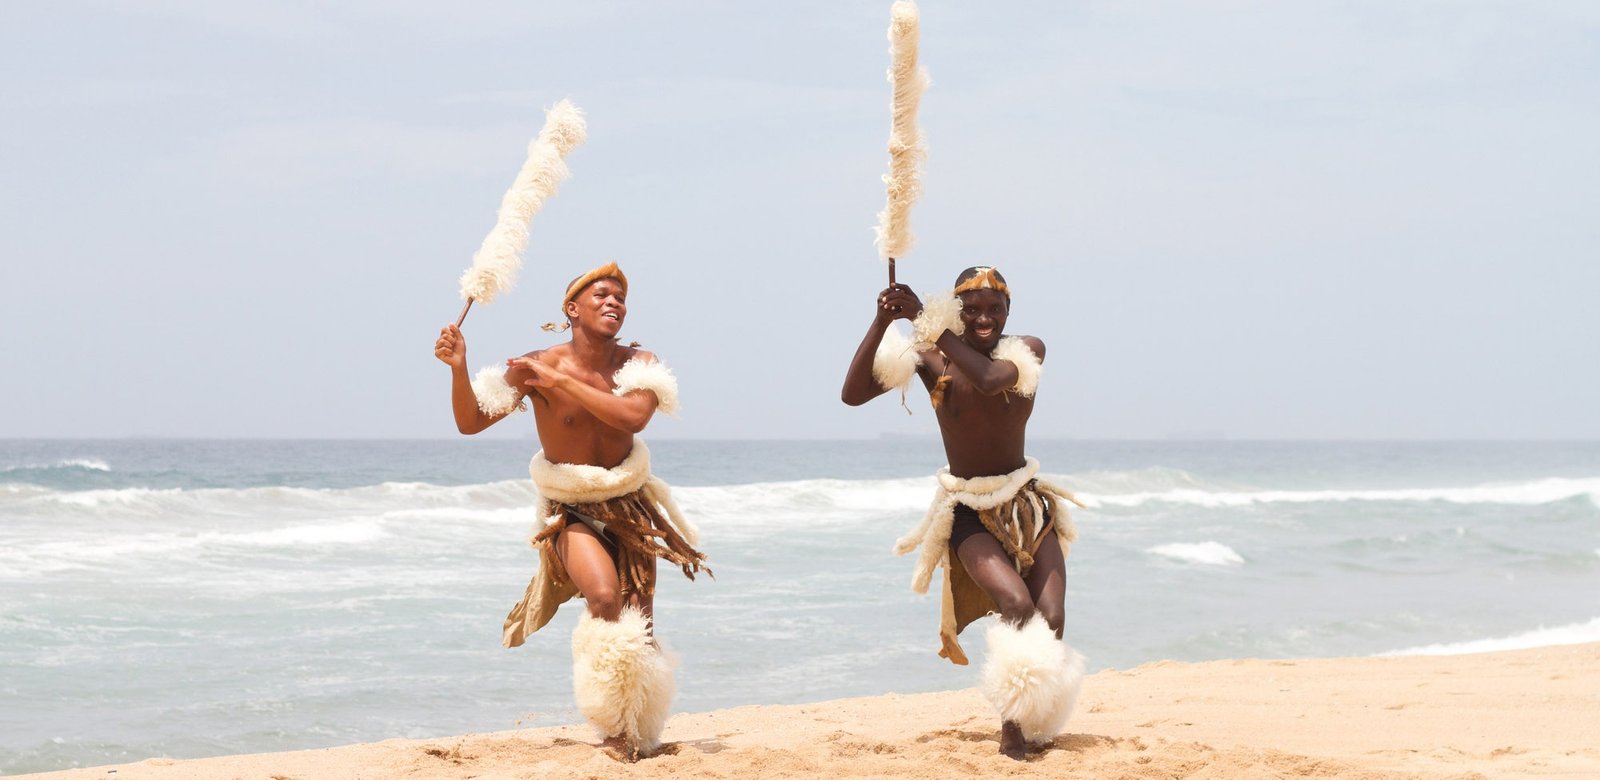 Zulu dancers perform on the beaches of the Dolphin Coast.